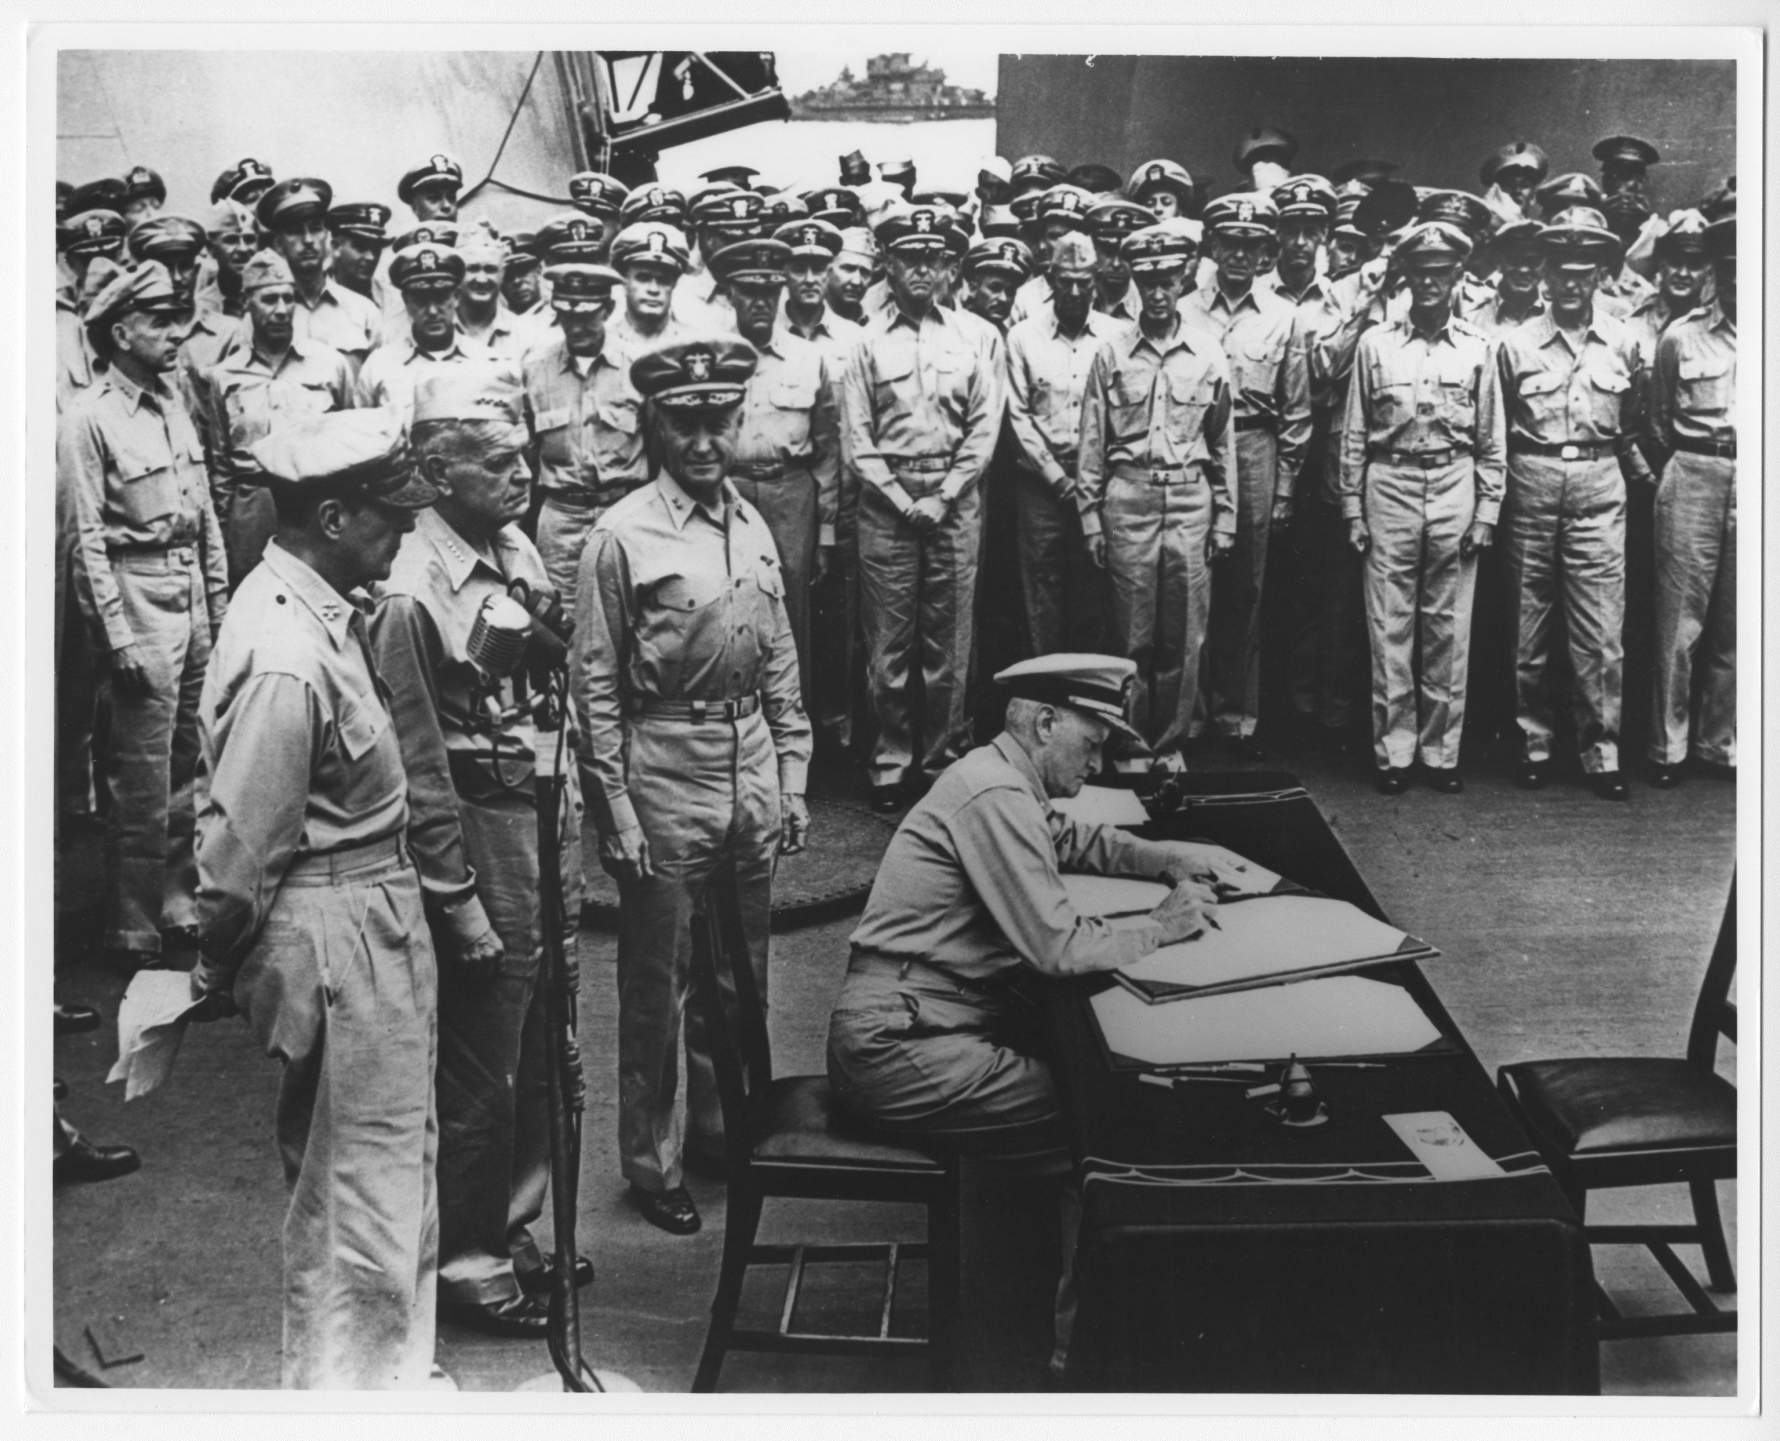 Admiral Nimitz | National Museum of the Pacific War